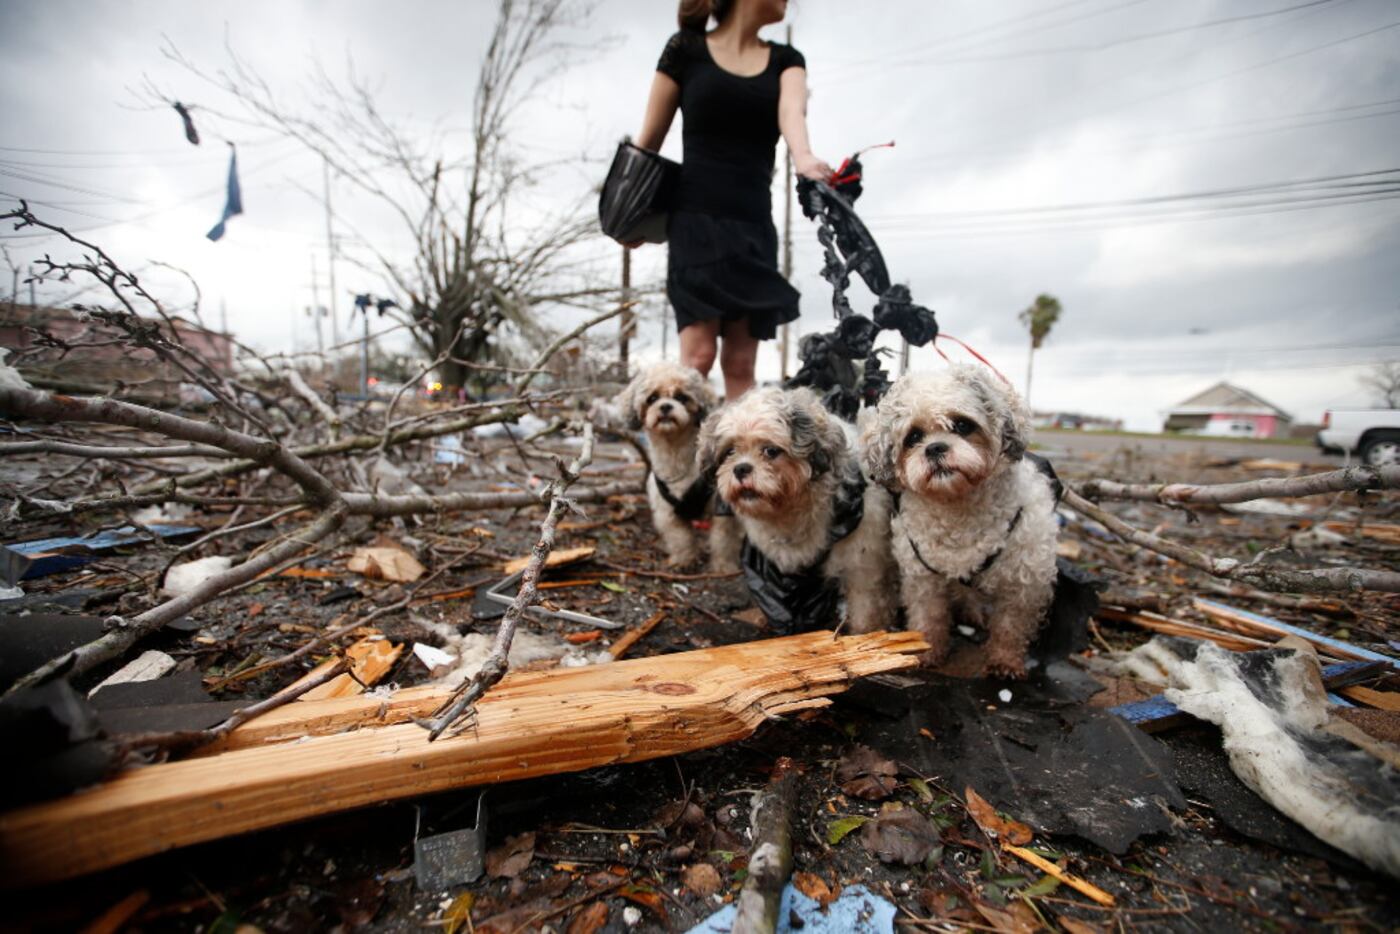 A woman holds the dogs by a make shift leash among the debris left behind by a tornado on...